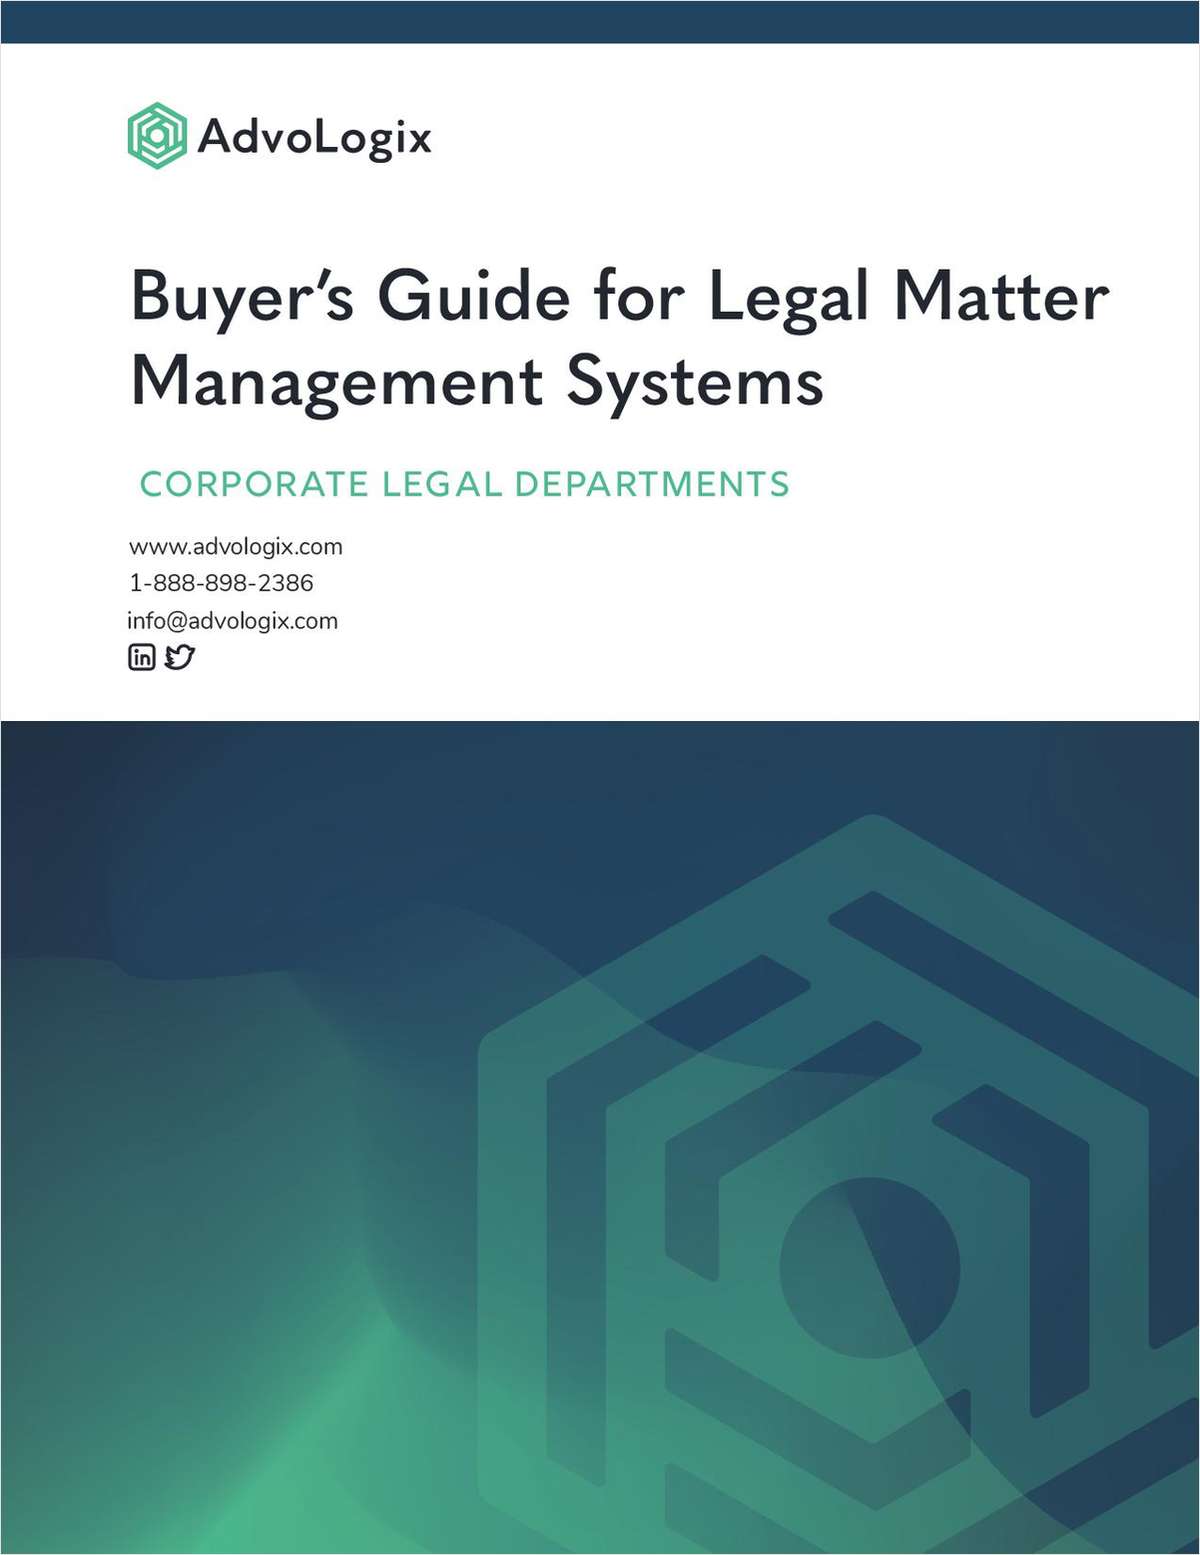 Highly effective case management offers advantages to improve operational practices, boost employee productivity and cut costs. Download this buyer’s guide for key focal areas to consider when evaluating legal matter management solutions for your legal team.